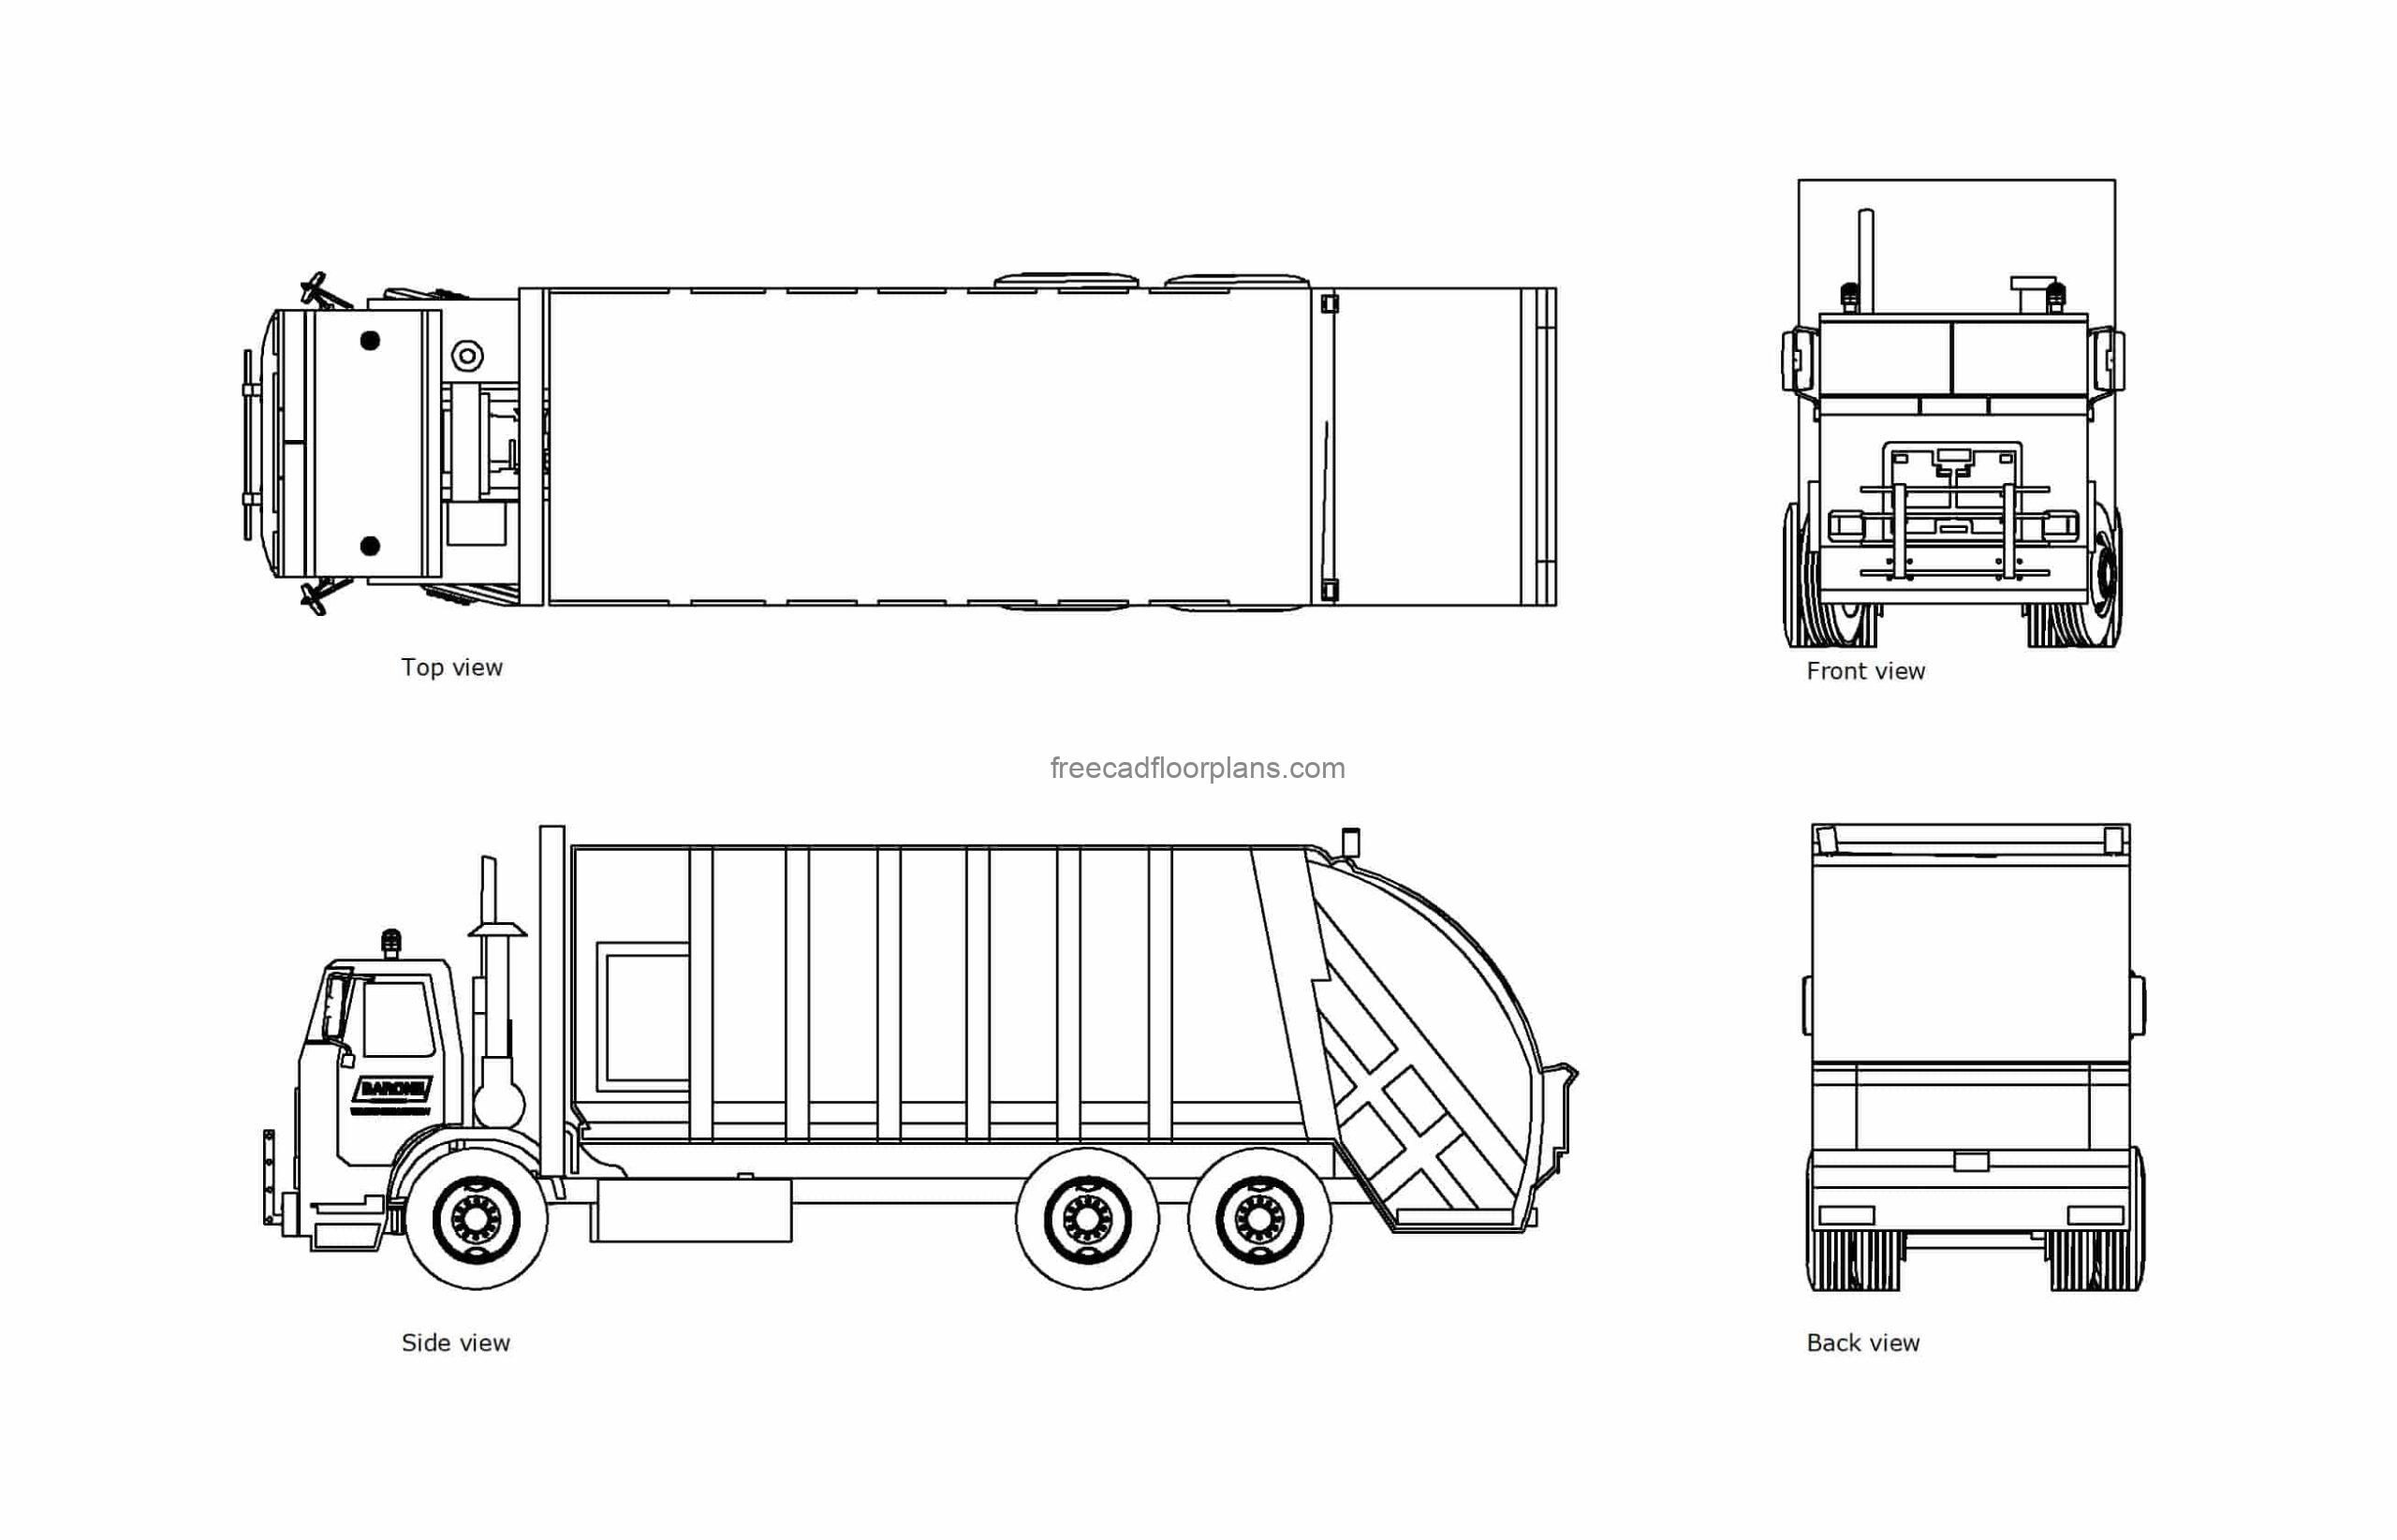 autocad drawing of a bin lorry, all 2d views, top, fron, and sides elevation, dwg file free for download